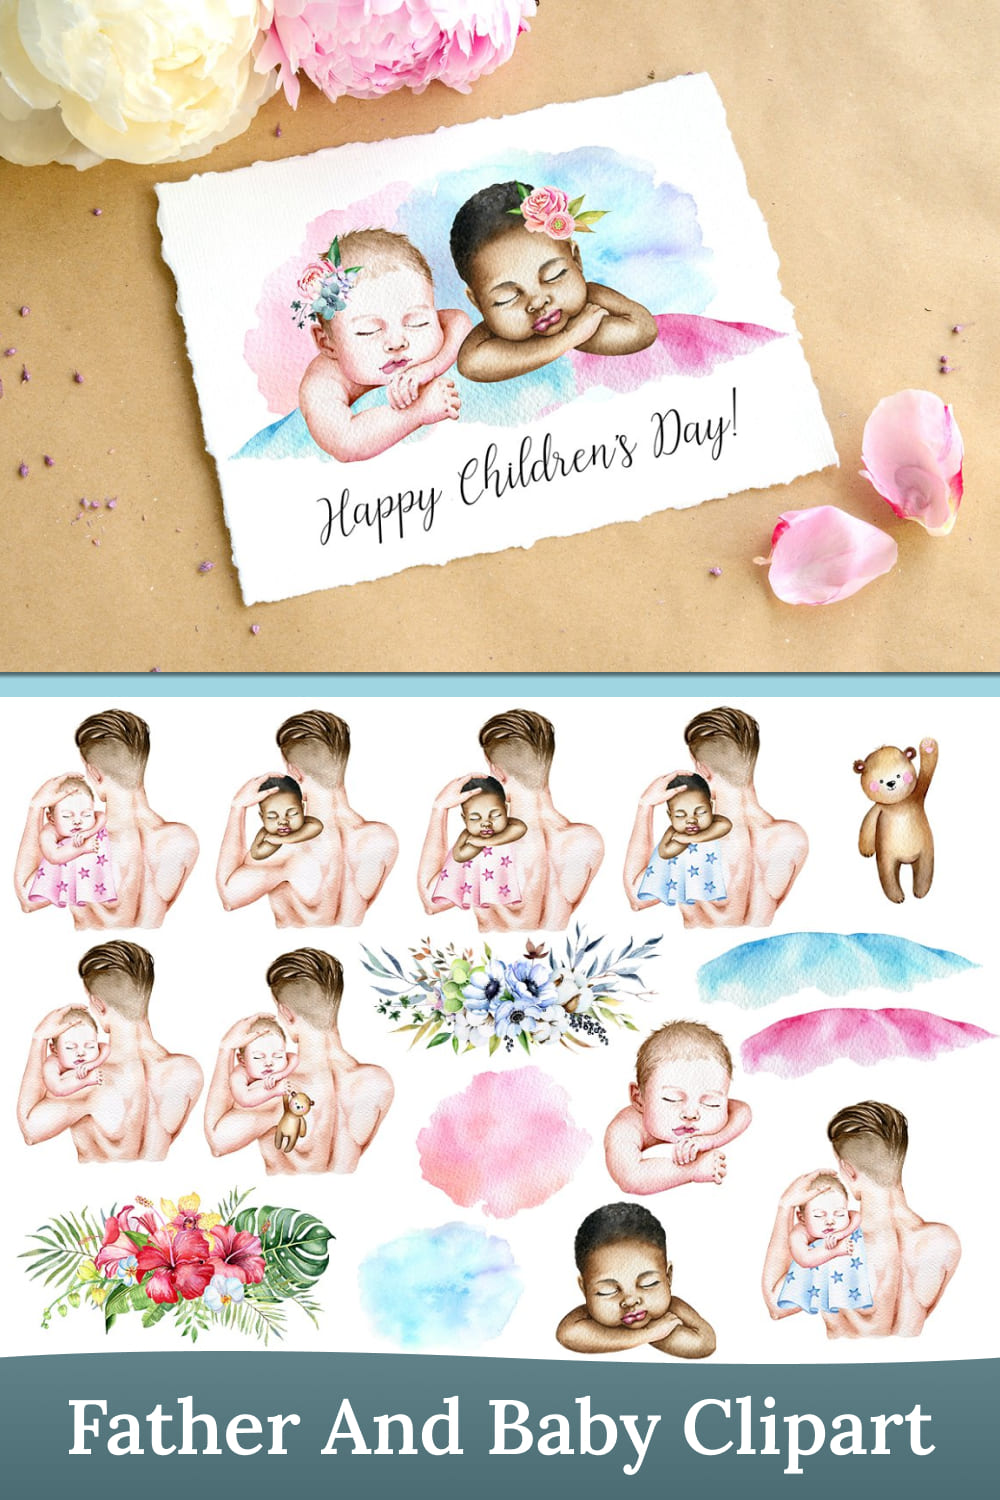 Father and baby clipart - pinterest image preview.